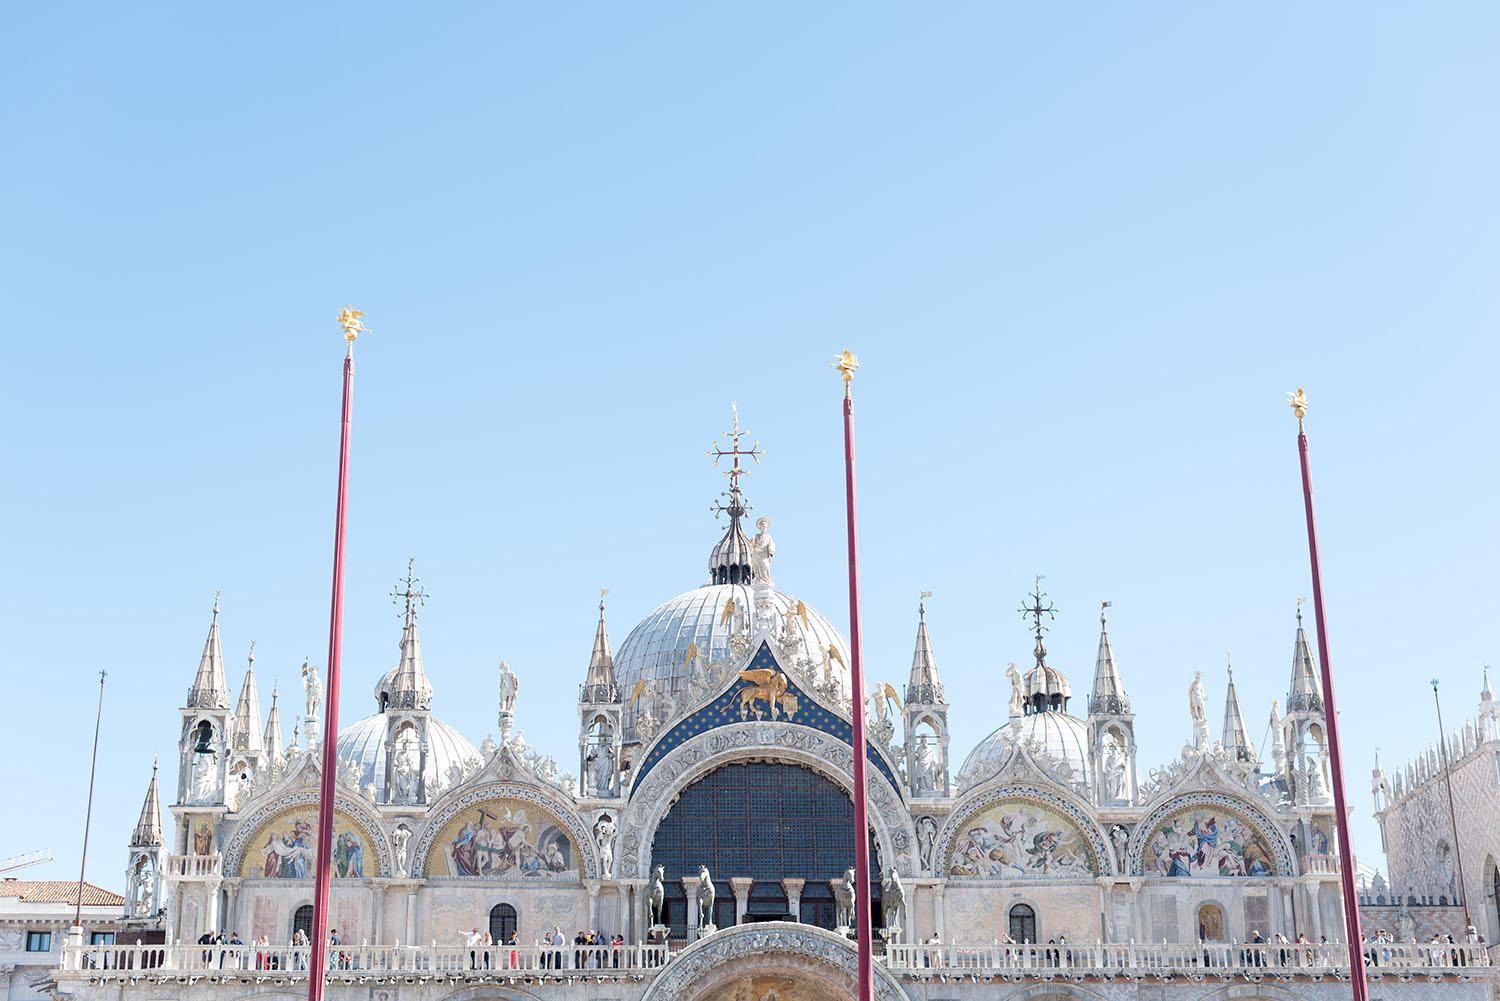 The rooftop of Saint Mark's cathedral in Venice, Italy, as captured by top Winnipeg travel blogger Cee Fardoe of Coco & Vera